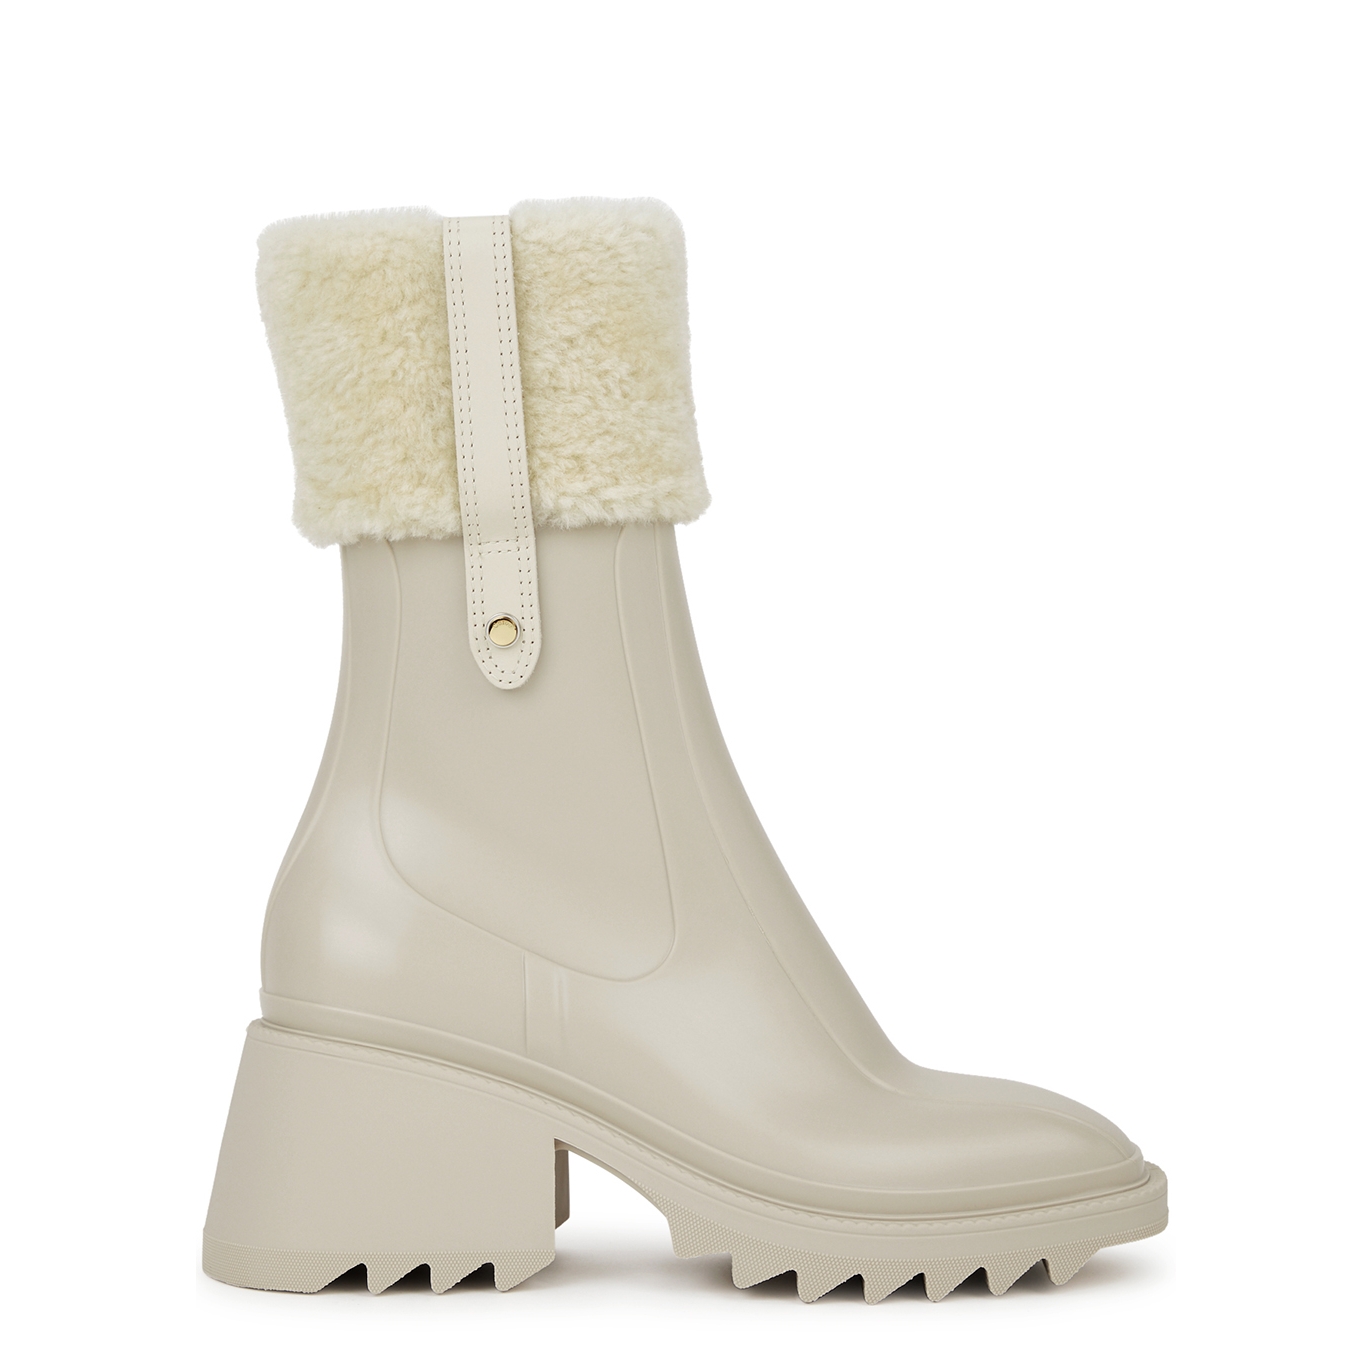 CHLOÉ BETTY 75 SHEARLING-TRIMMED PVC ANKLE BOOTS